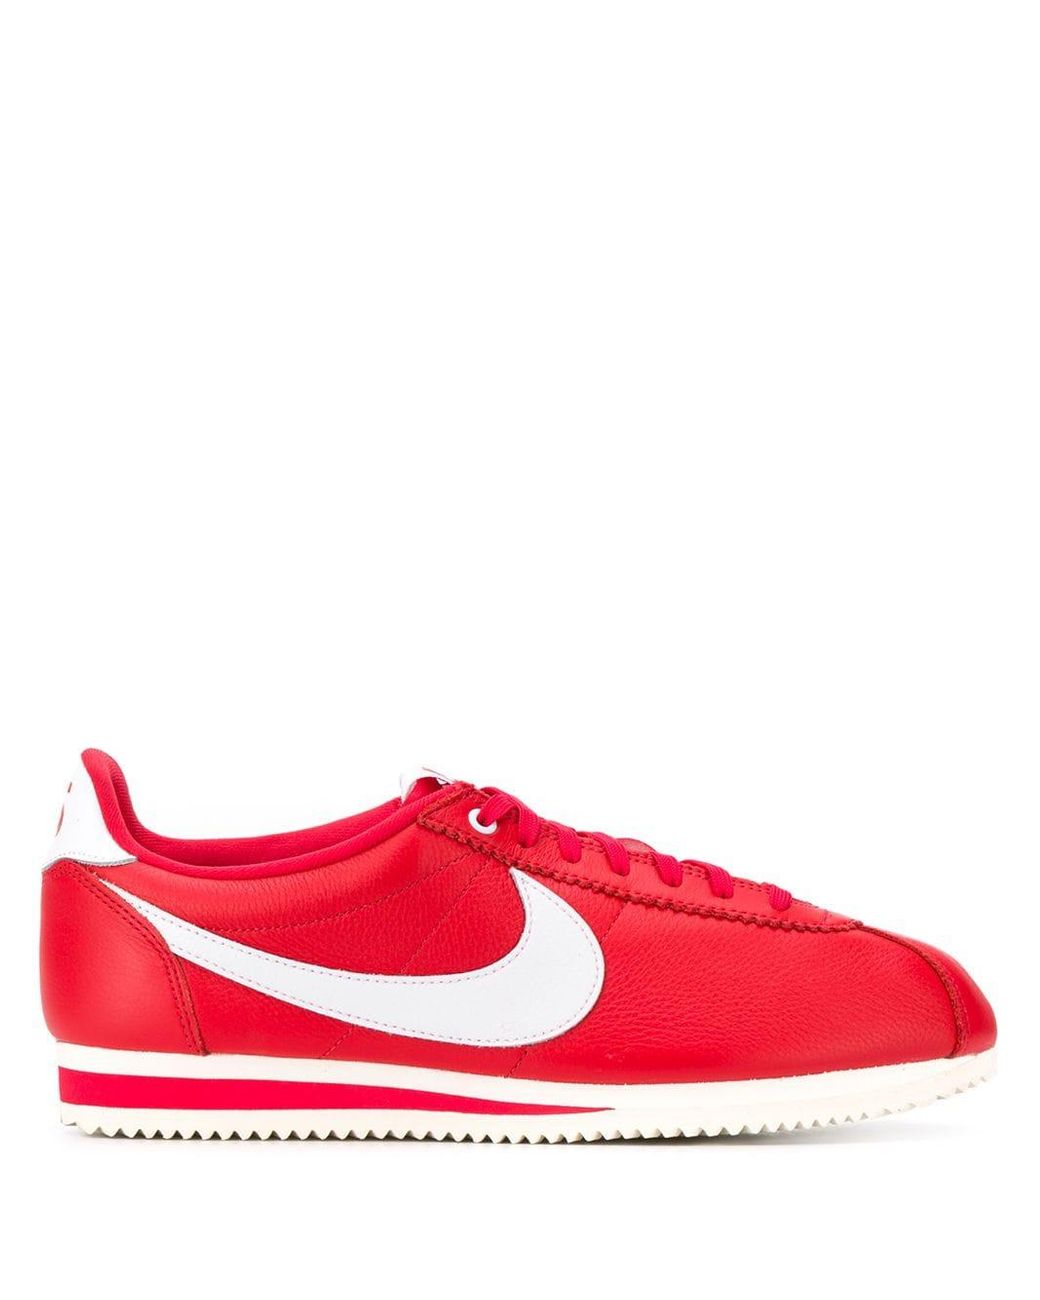 Nike Leather X Stranger Things Cortez (4th Of July) Shoe in University Red  (Red) for Men - Save 77% | Lyst